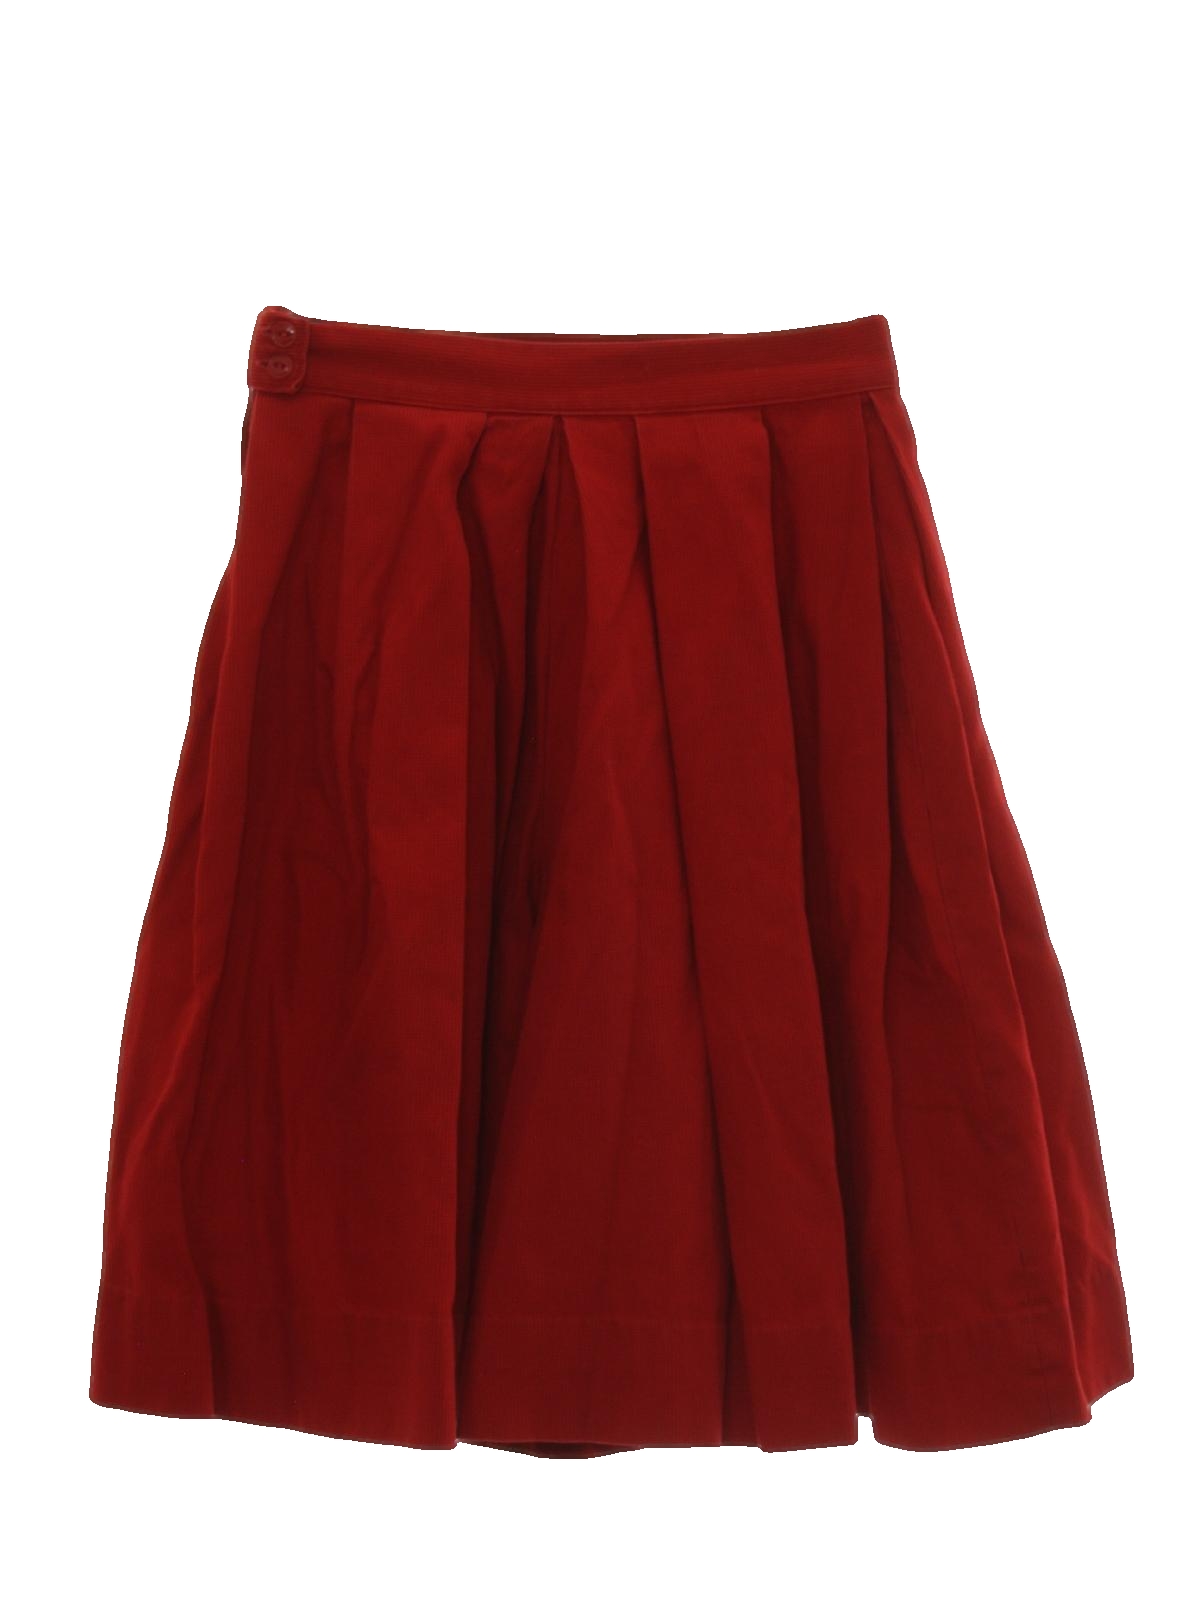 1960s Vintage Skirt: 60s -no label- Womens red cotton blend waffle ...